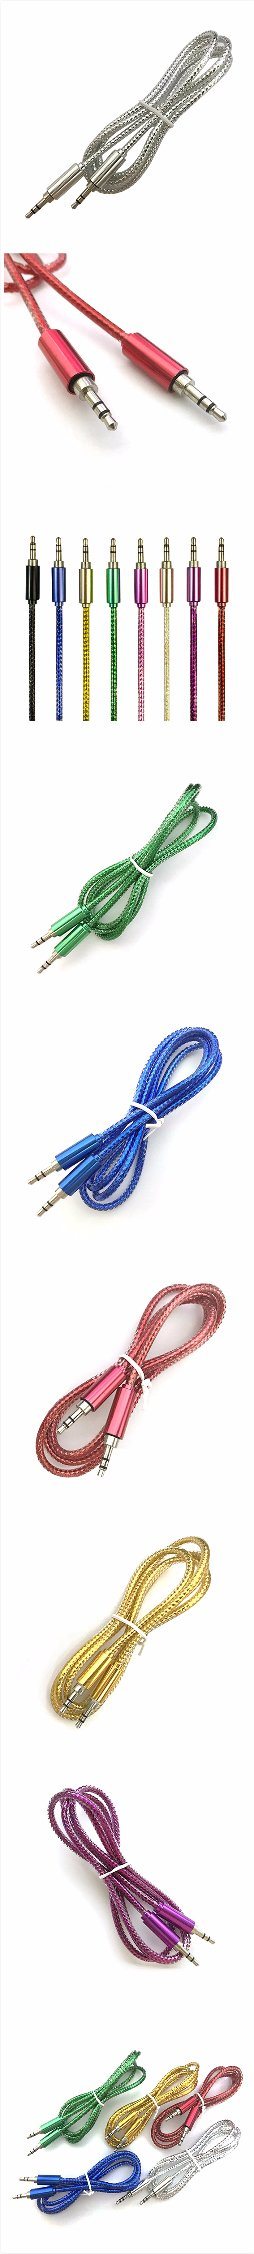 Colorful Cheap High Quality Fish Scales Audio Video Cable